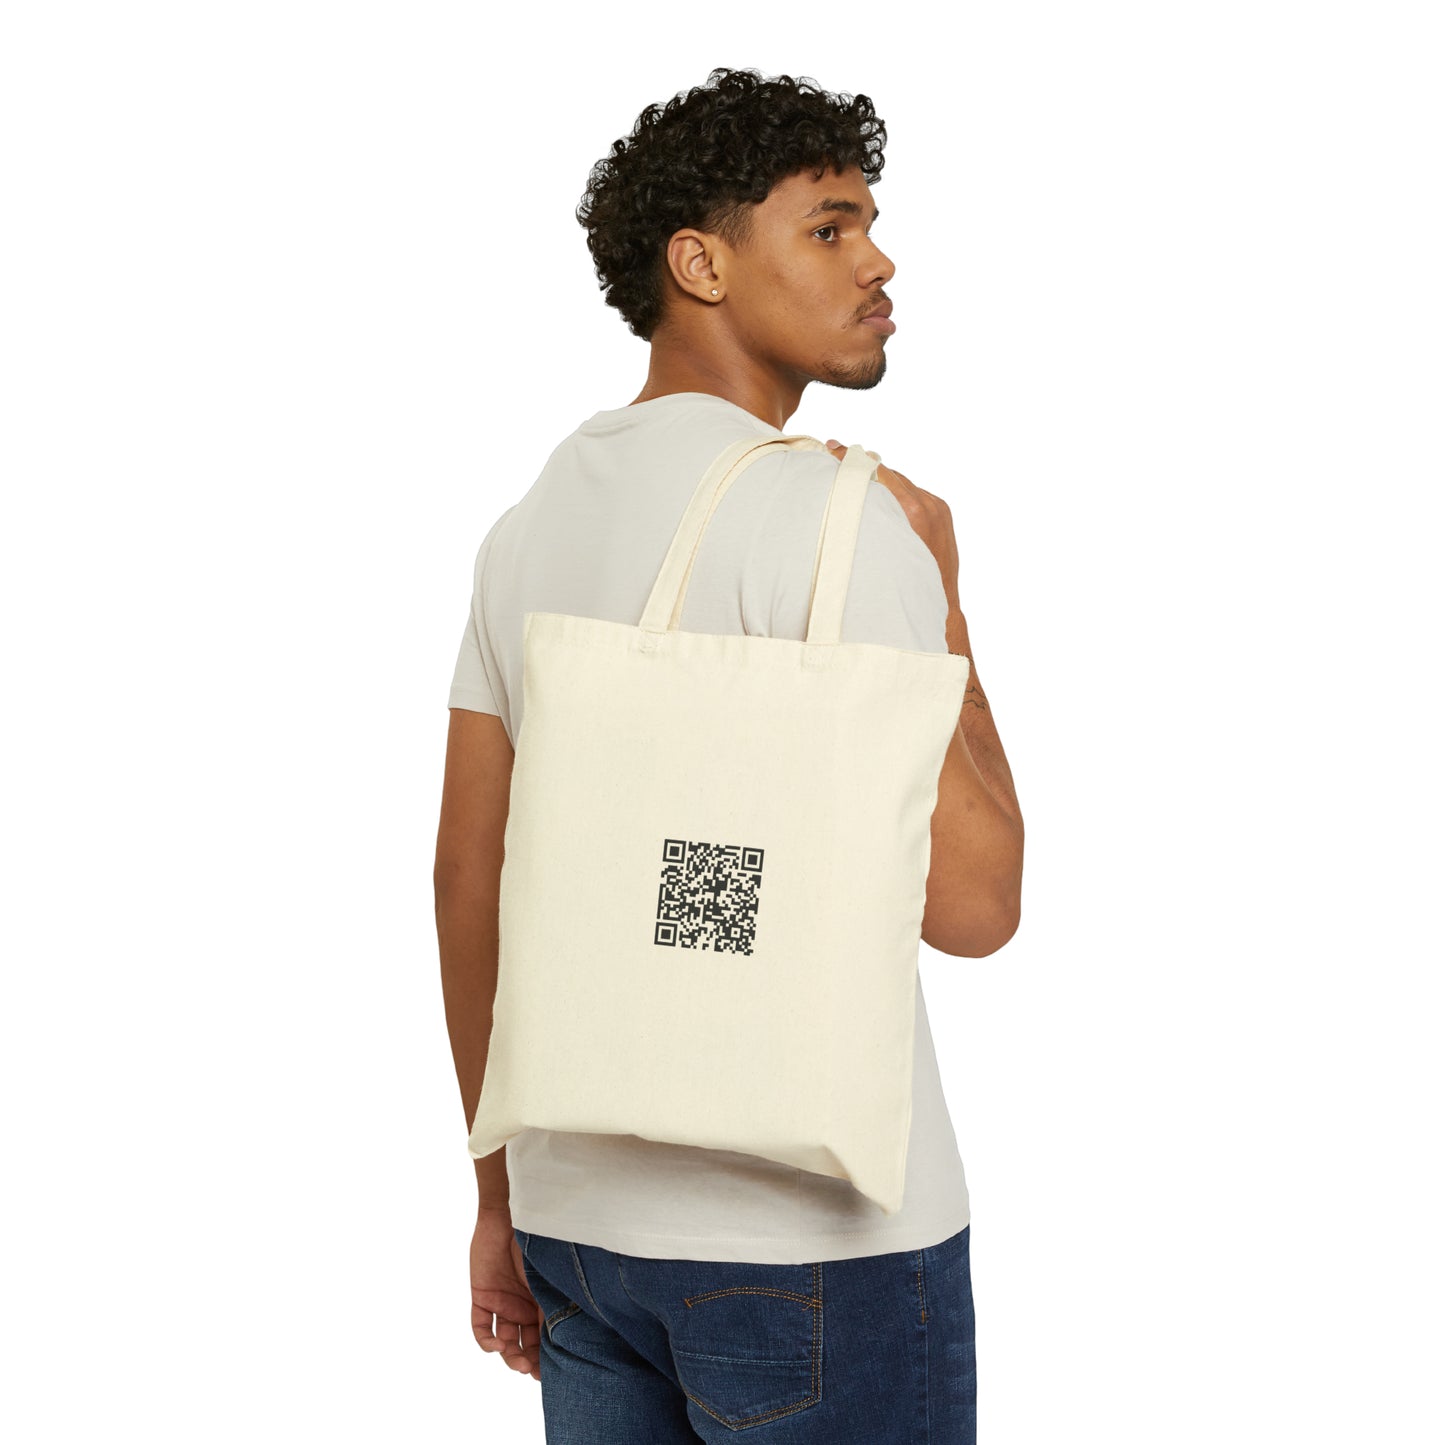 Welcome To Somerville Grange - Cotton Canvas Tote Bag